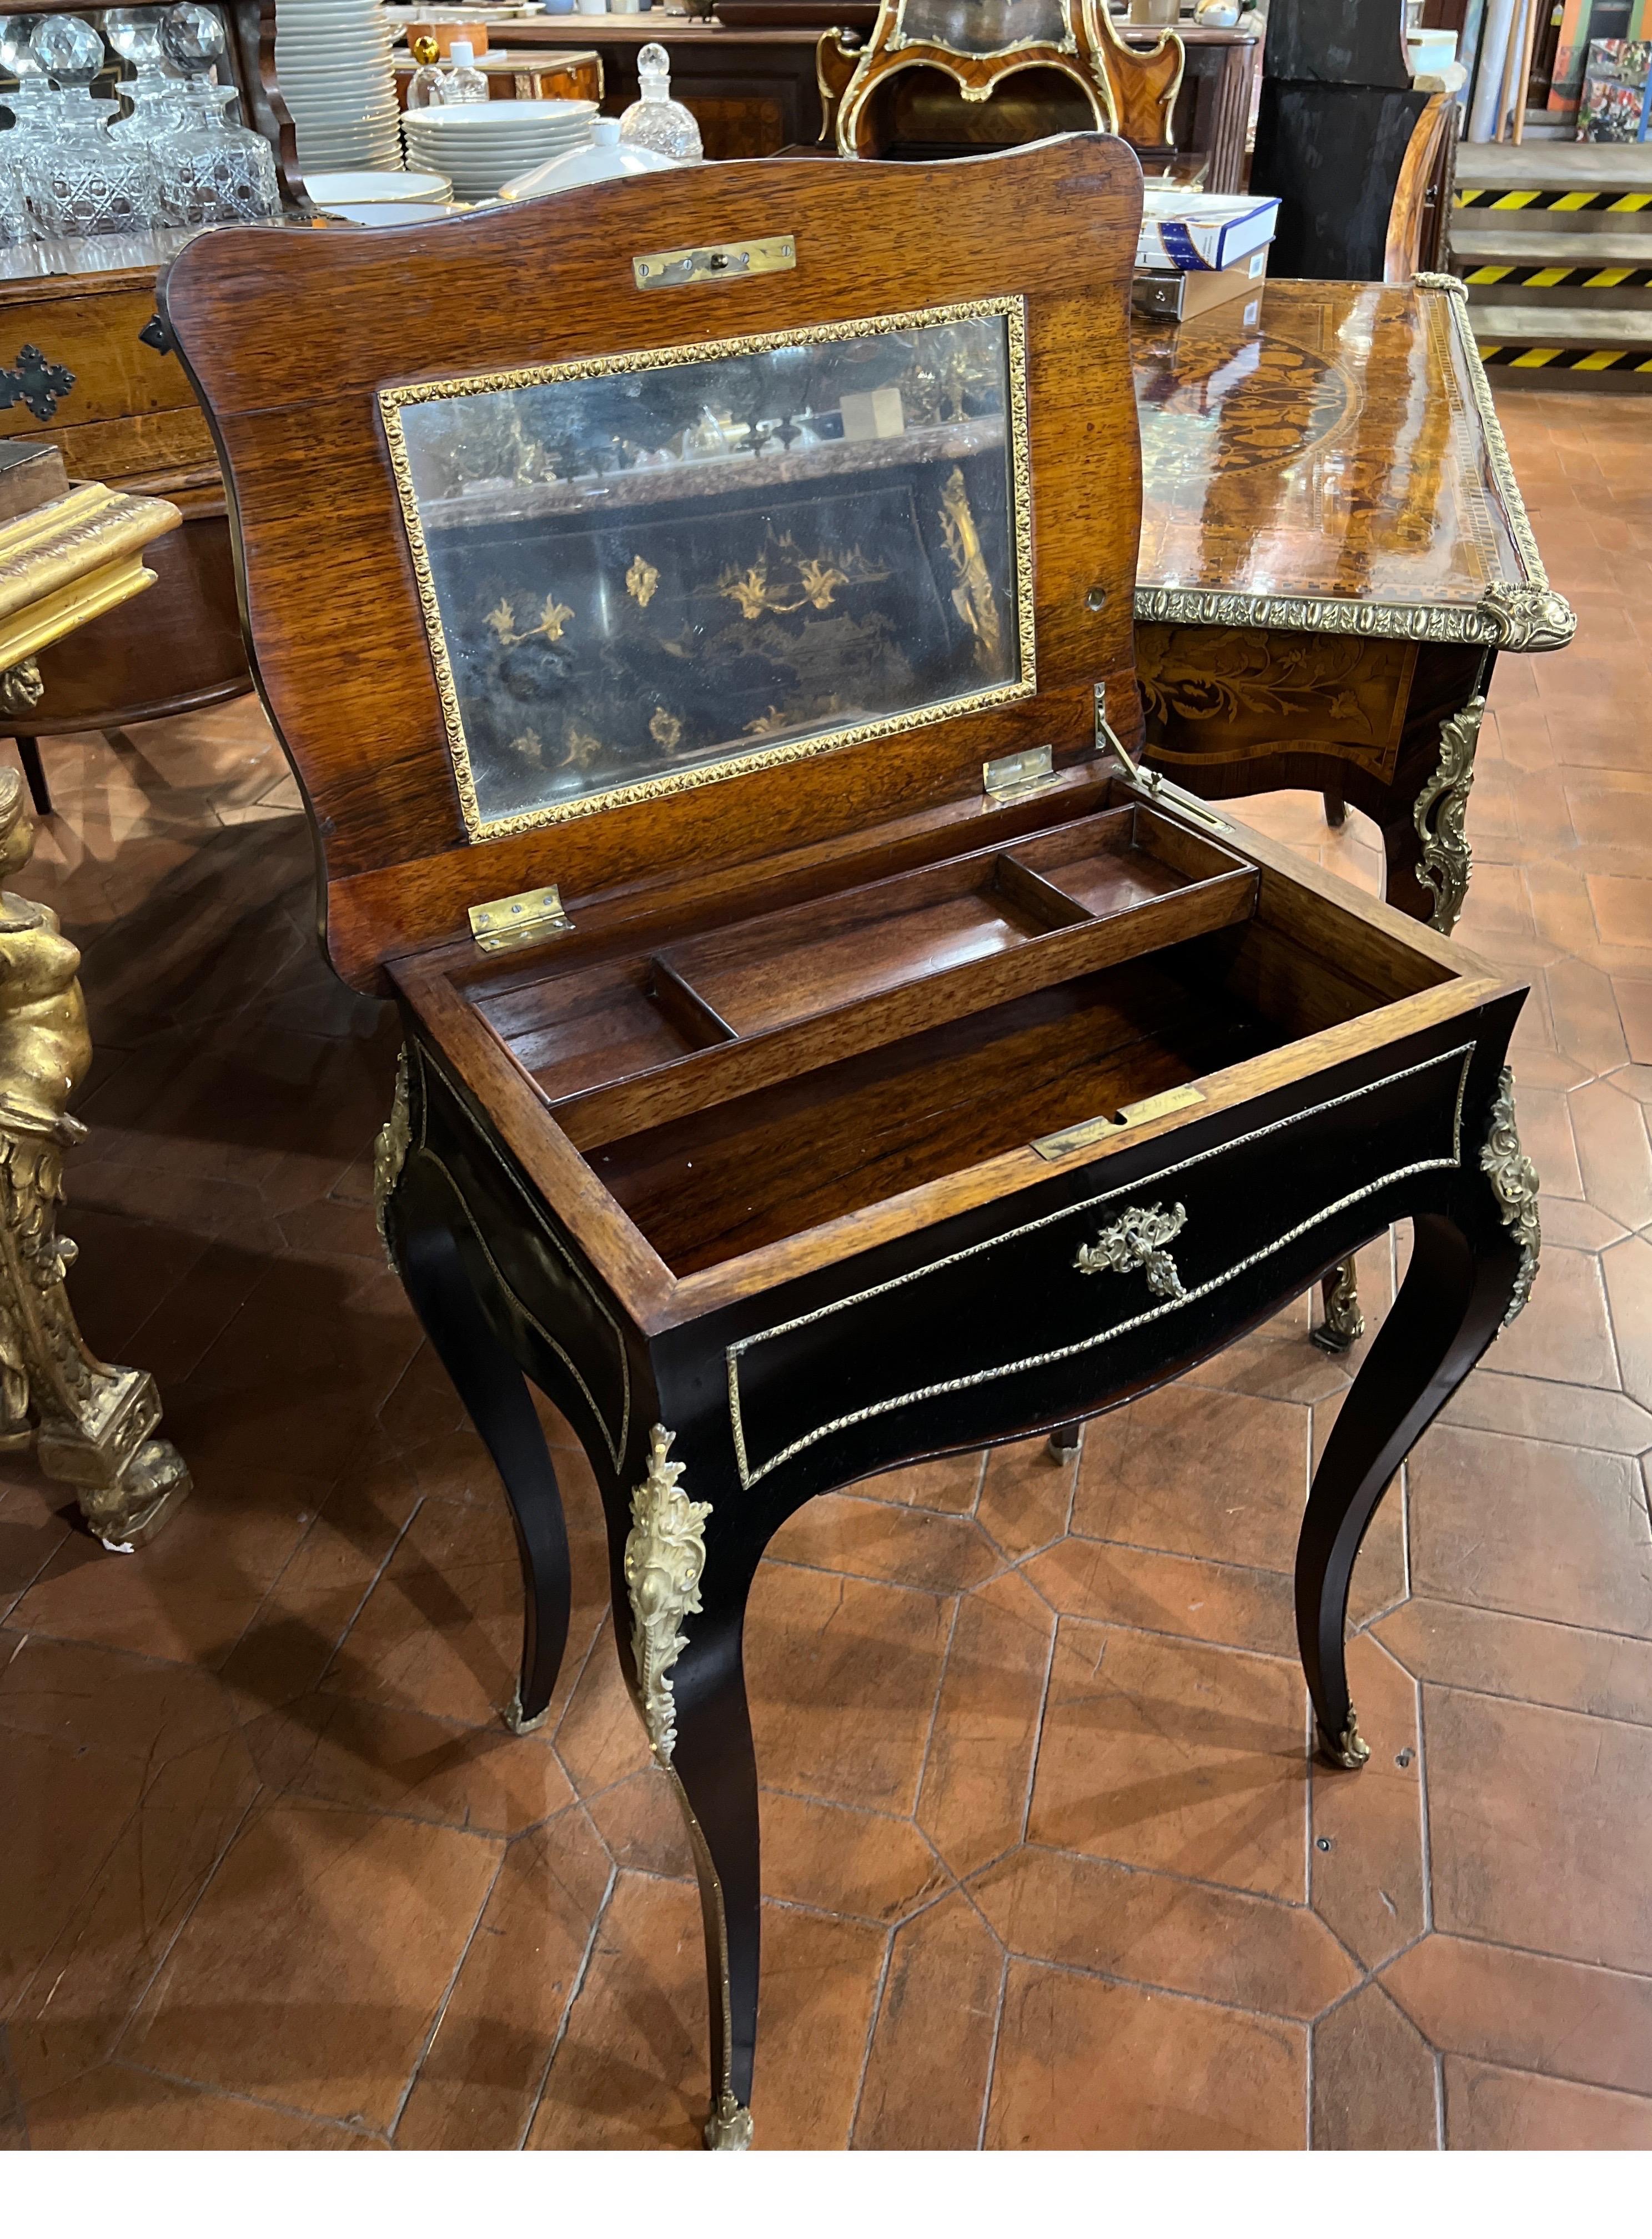 Ladies' dressing table, French provenance, Napoleon III era, ca. 1850-1860. The side table has classic black lacquer with gilt bronze ornaments, on the top a floral pattern inlay.
Signed on the lock Diehl Paris.